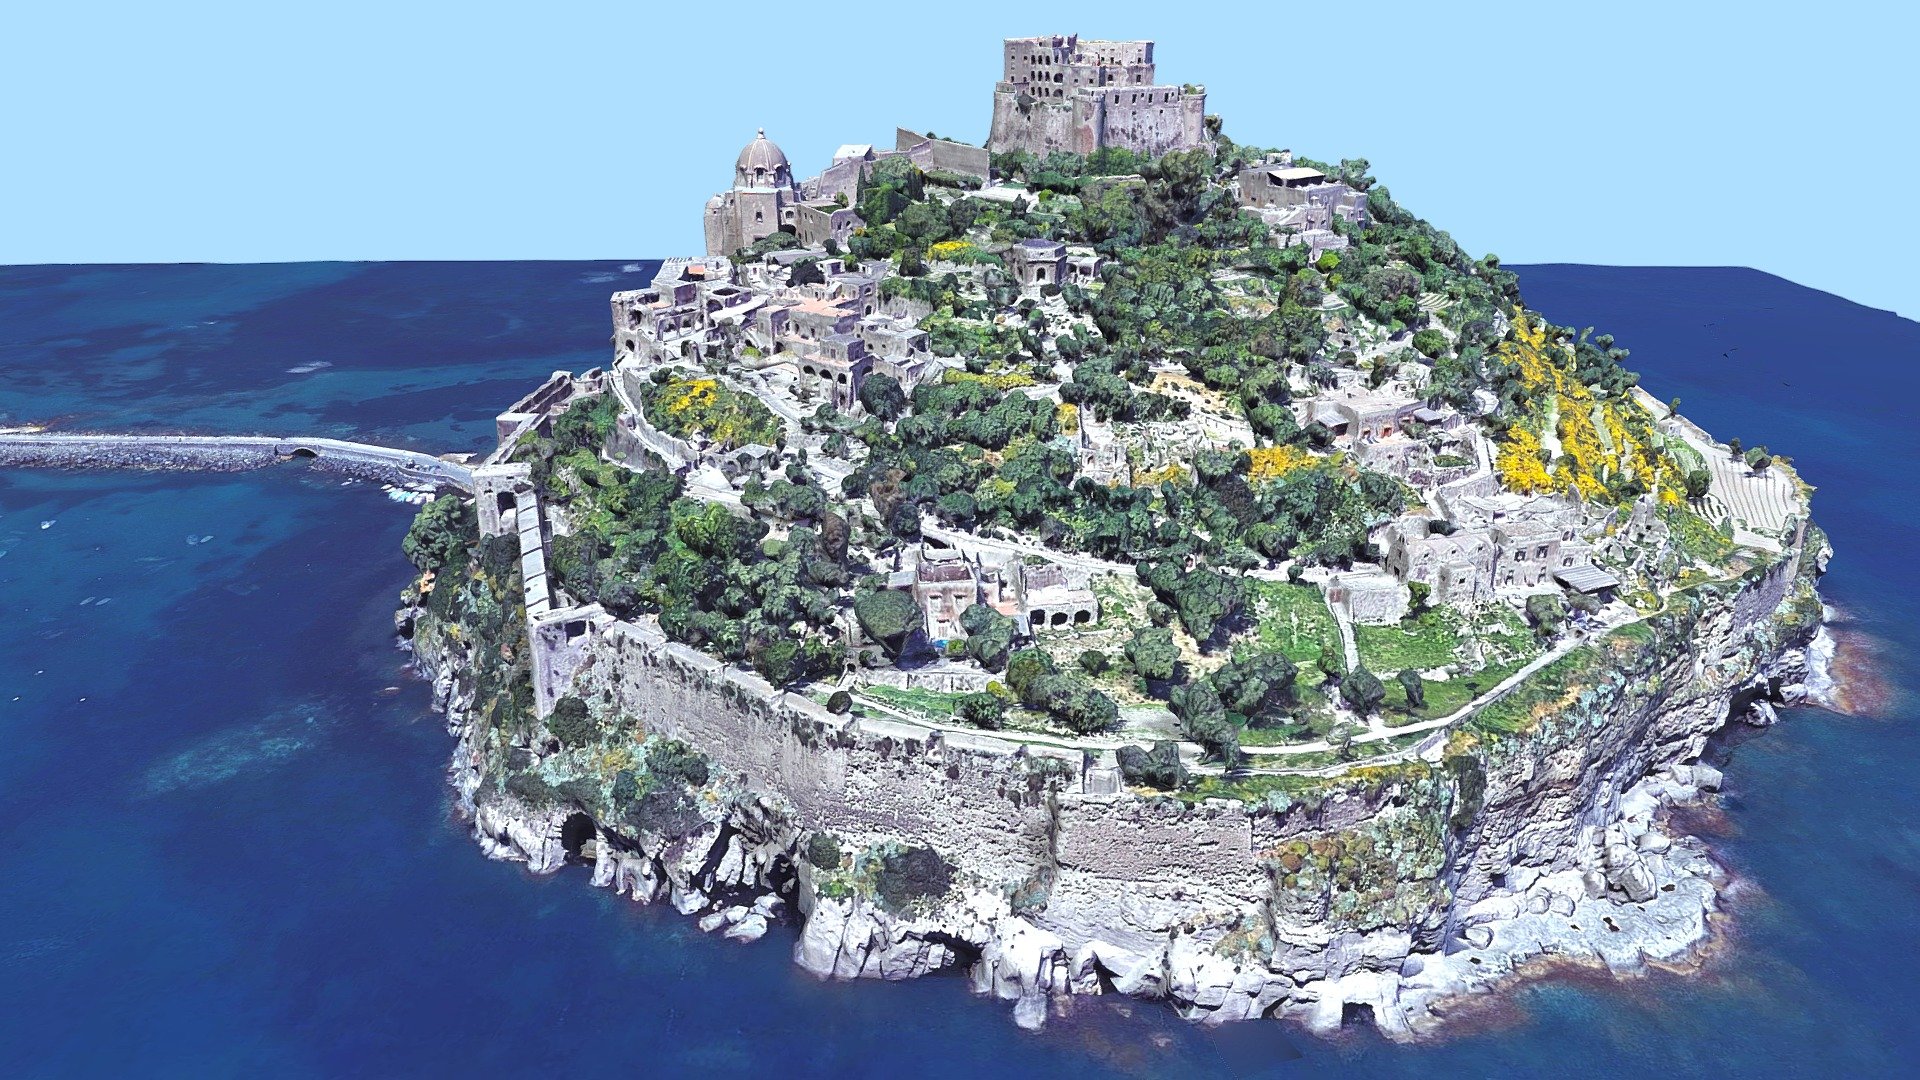 Aragonese Castle (Italian: Castello Aragonese) is a medieval castle next to Ischia (one of the Phlegraean Islands), at the northern end of the Gulf of Naples, Italy.[1] The castle stands on a volcanic rocky islet that connects to the larger island of Ischia by a causeway (Ponte Aragonese).

The castle was built by Hiero I of Syracuse in 474 BC. At the same time, two towers were built to control enemy fleets' movements. The rock was then occupied by Parthenopeans (the ancient inhabitants of Naples). In 326 BC the fortress was captured by Romans, and then again by the Parthenopeans. In 1441 Alfonso V of Aragon connected the rock to the island with a stone bridge instead of the prior wood bridge, and fortified the walls in order to defend the inhabitants against the raids of pirates.

Around 1700, about 2000 families lived on the islet, including a Poor Clares convent, an abbey of Basilian monks (of the Greek Orthodox Church), the bishop and the seminar, the prince with a military garrison.
Source: Wikipedia.org - Aragonese Castle, Castello, medieval, Italy - Buy Royalty Free 3D model by LibanCiel 3d model